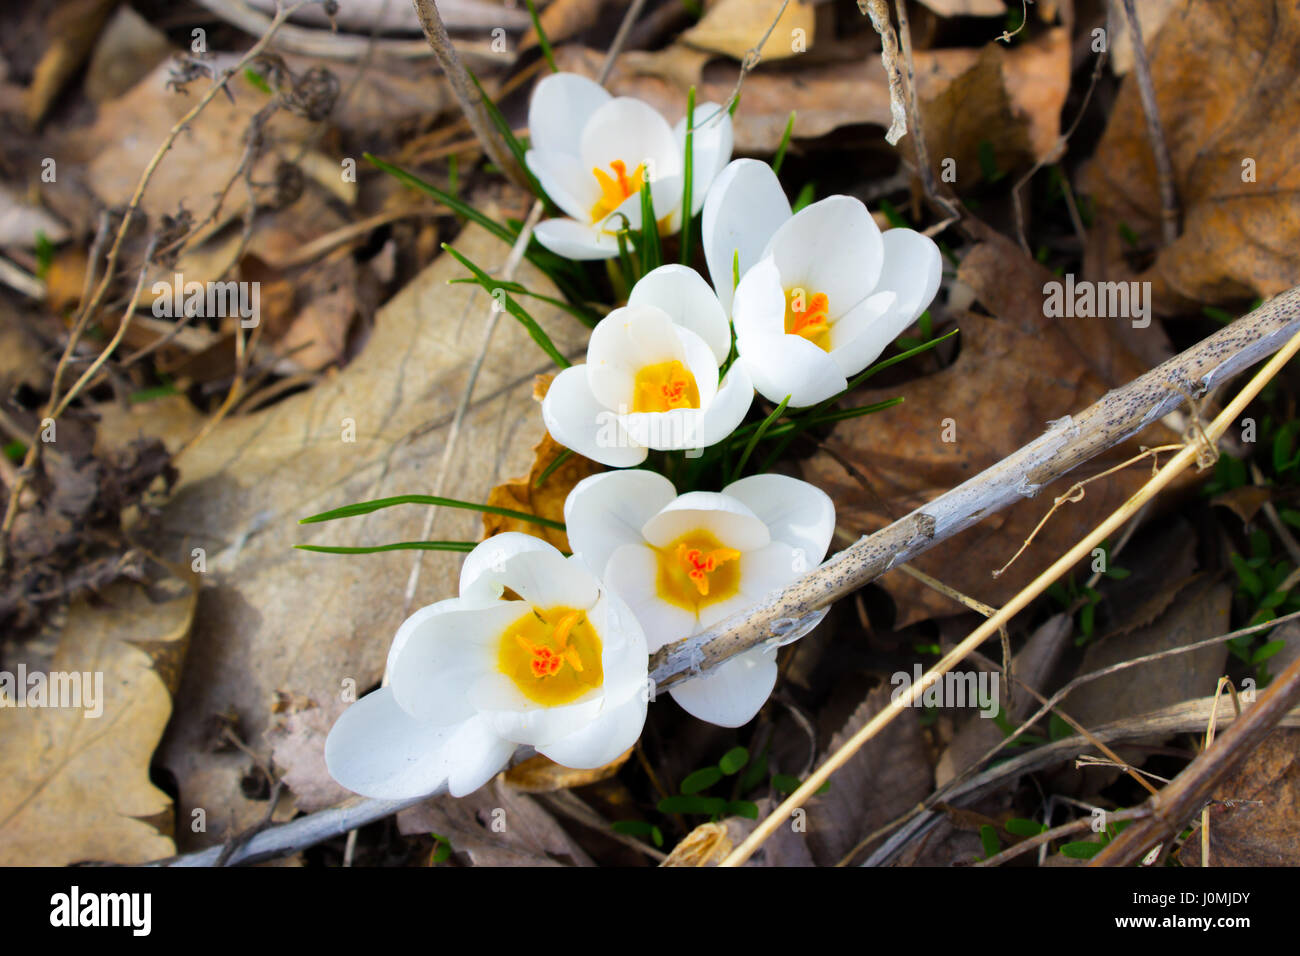 spring flowers on dead leaves Stock Photo